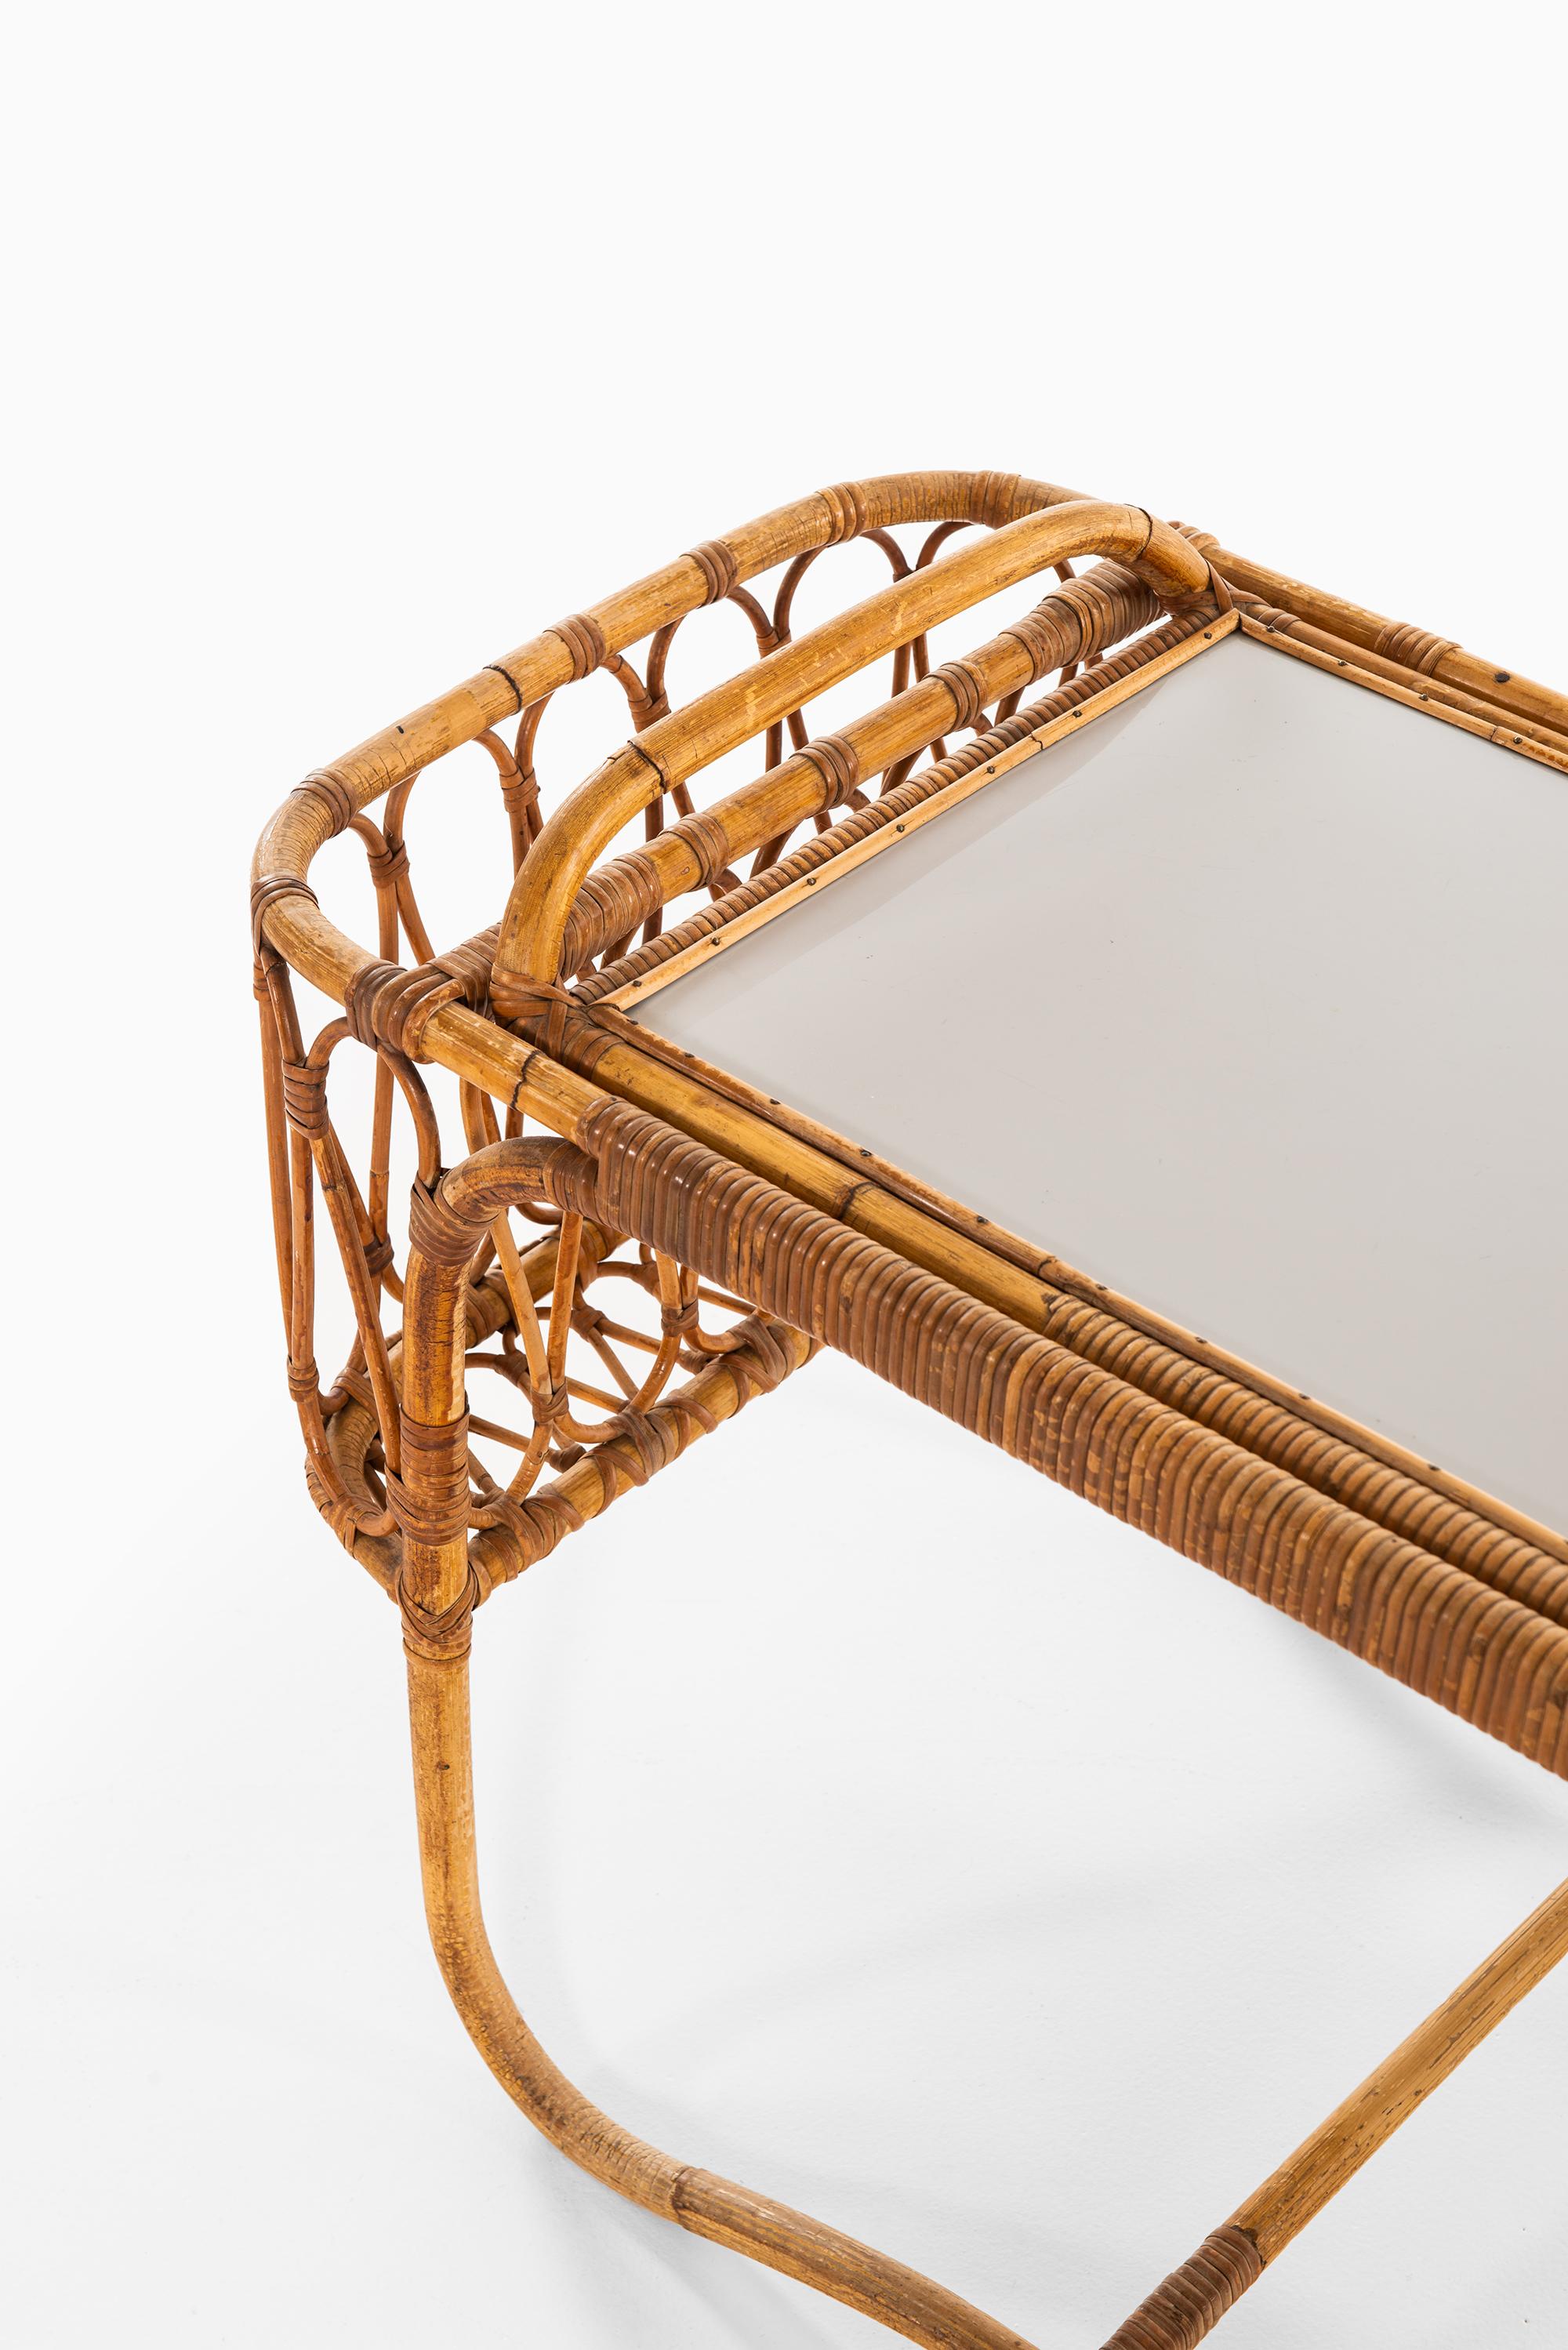 Scandinavian Modern Tray Table in Rattan and Cane by E.V.A. Nissen & Co in Denmark